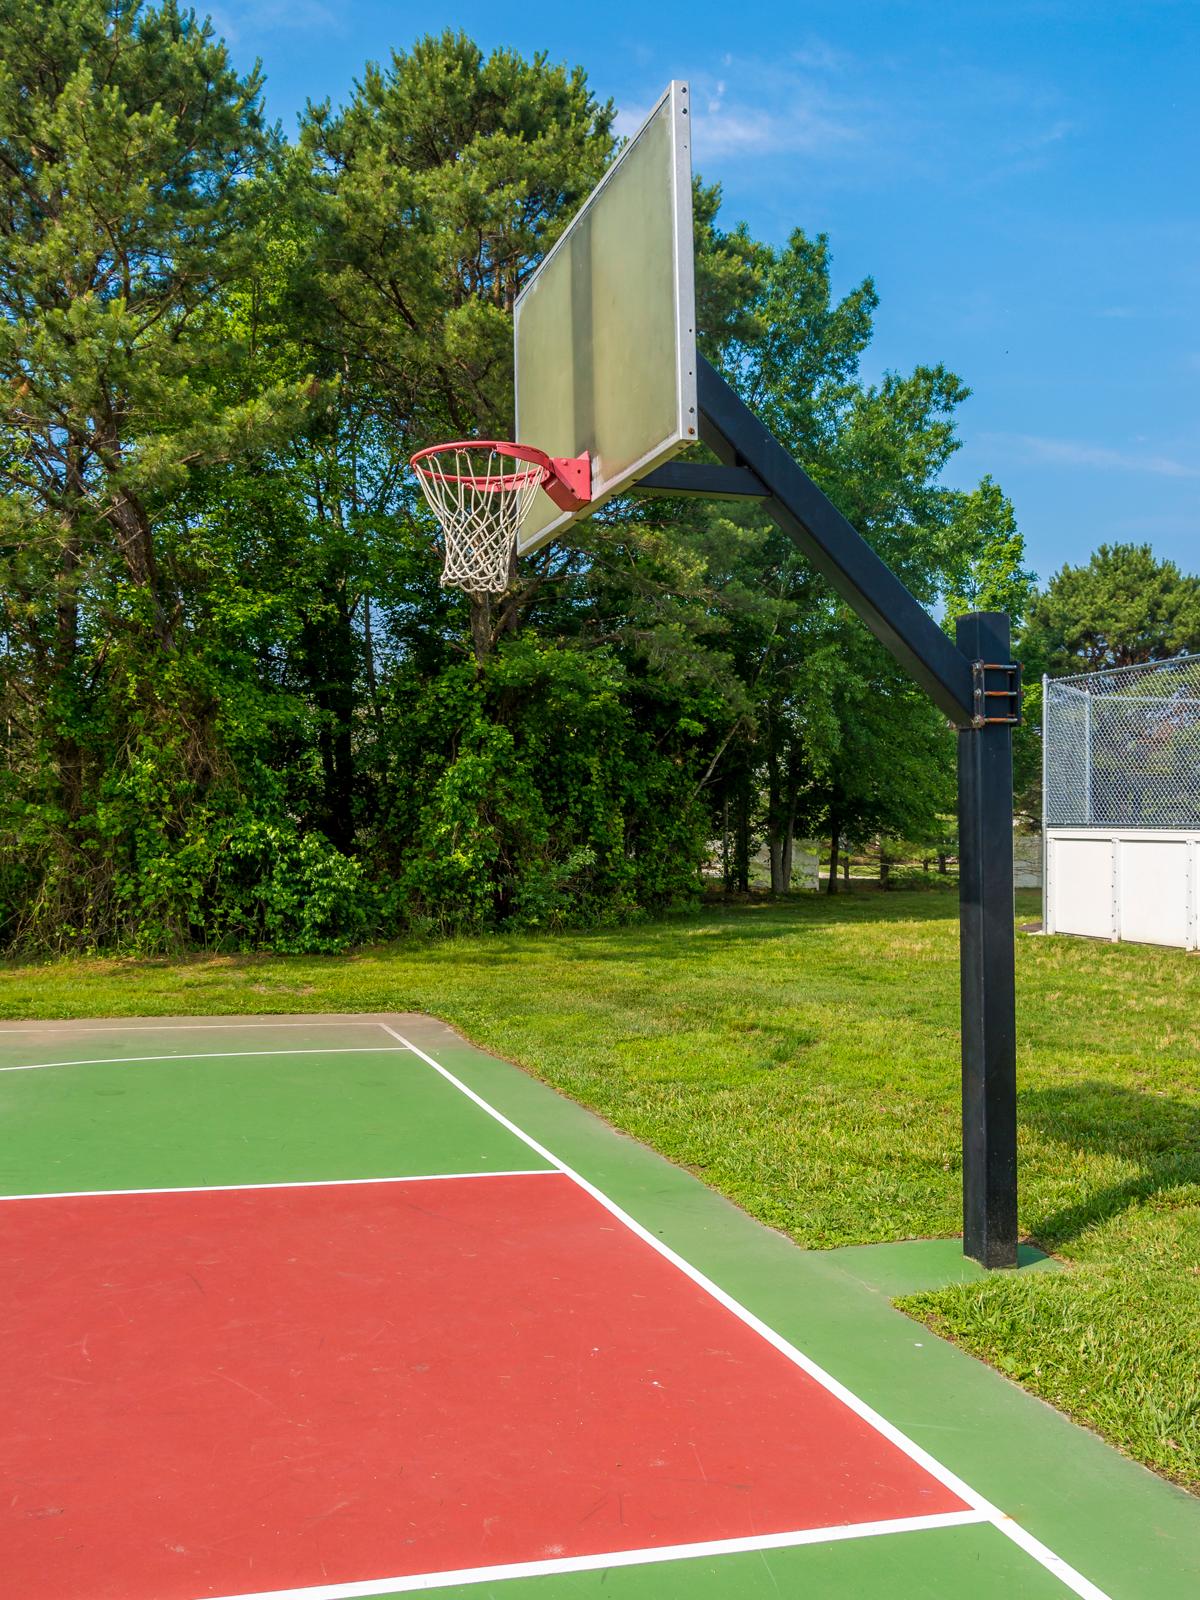 The Different Layouts and Measurements of a Basketball Court